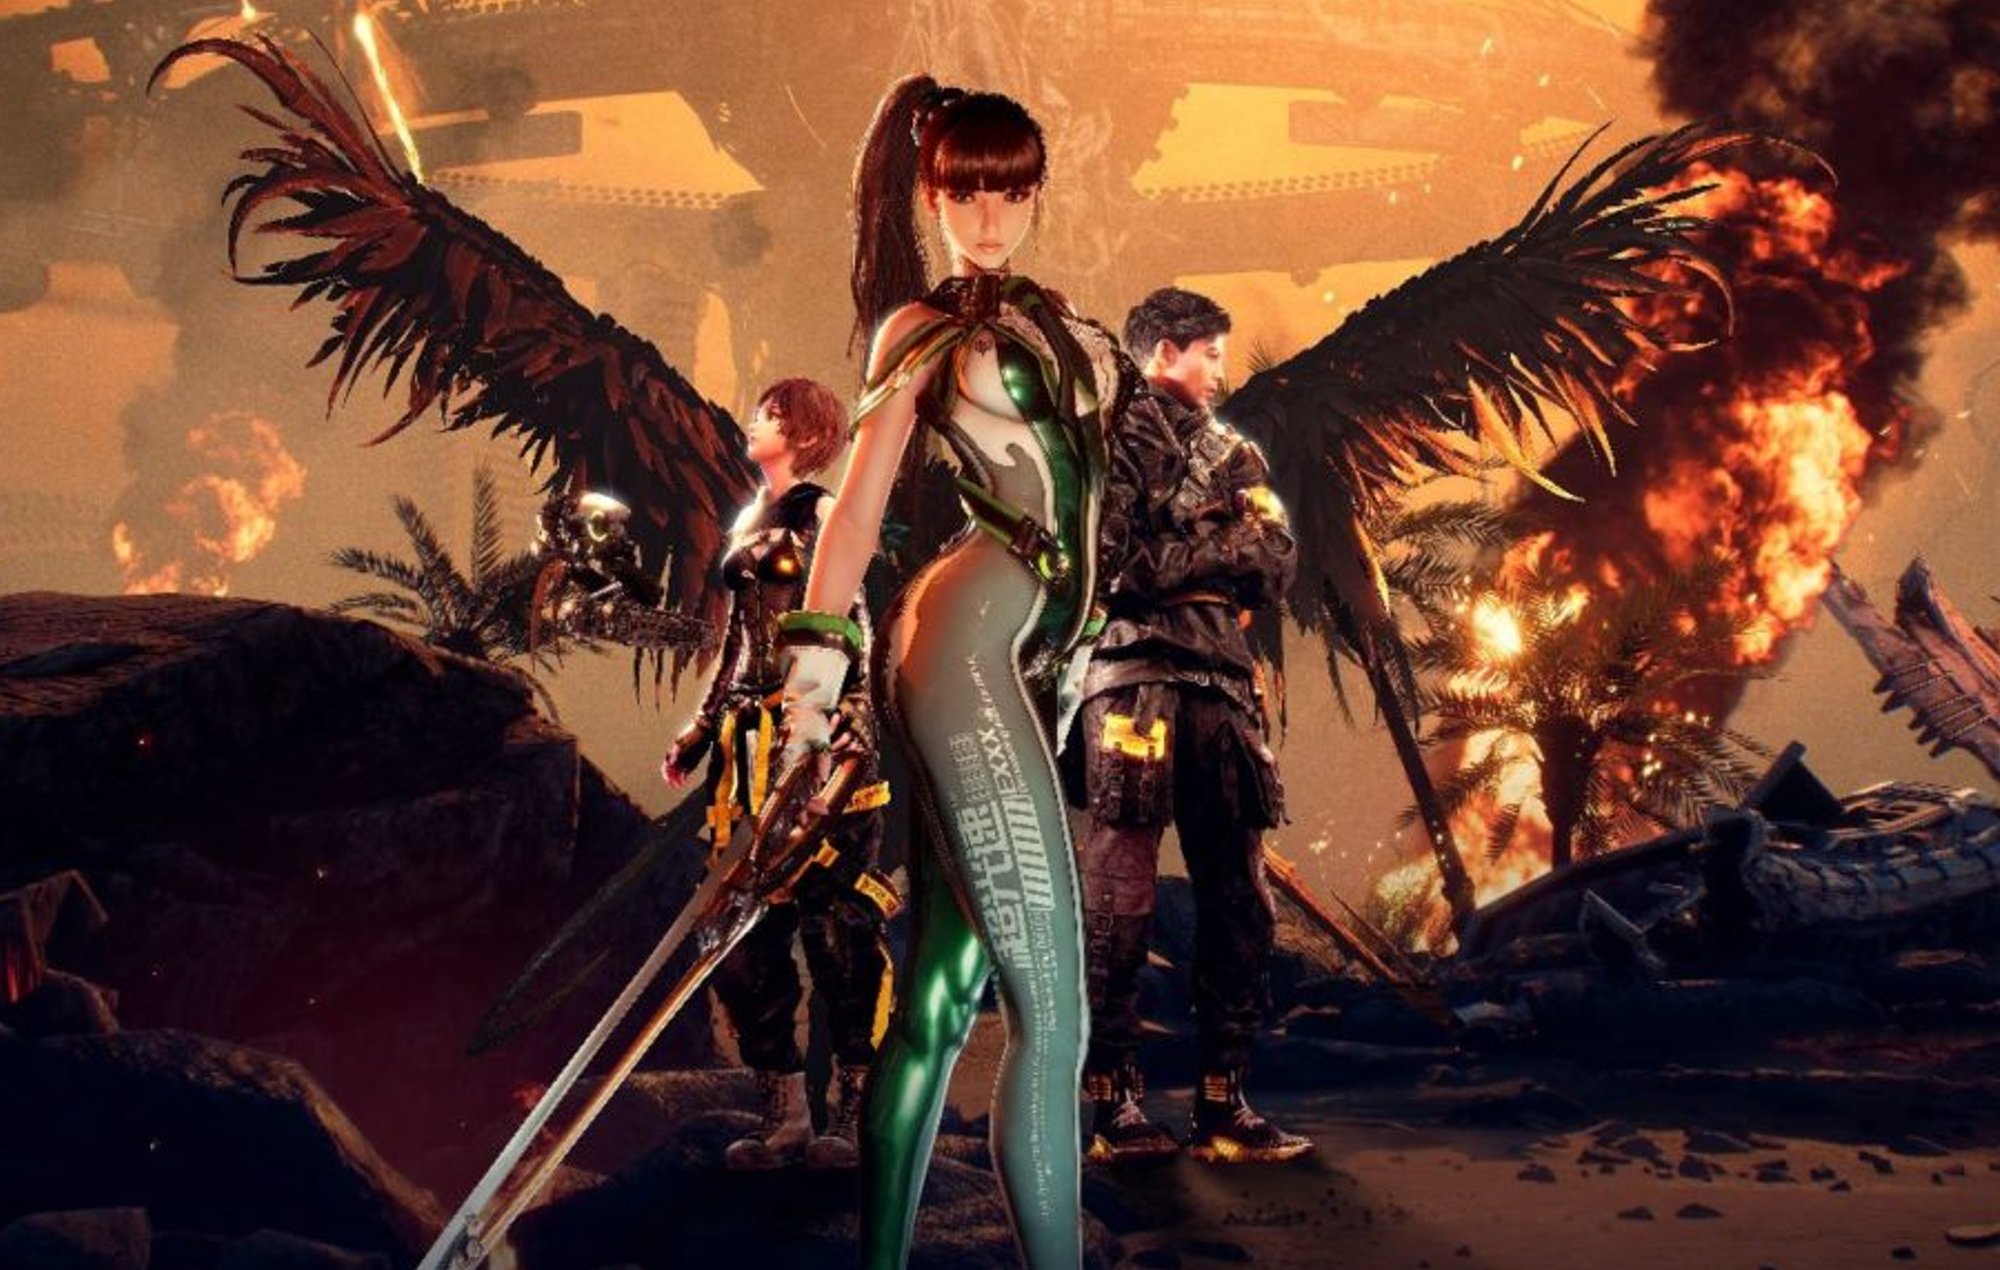 Stellar Blade Costumes: Eve can be seen in her costume